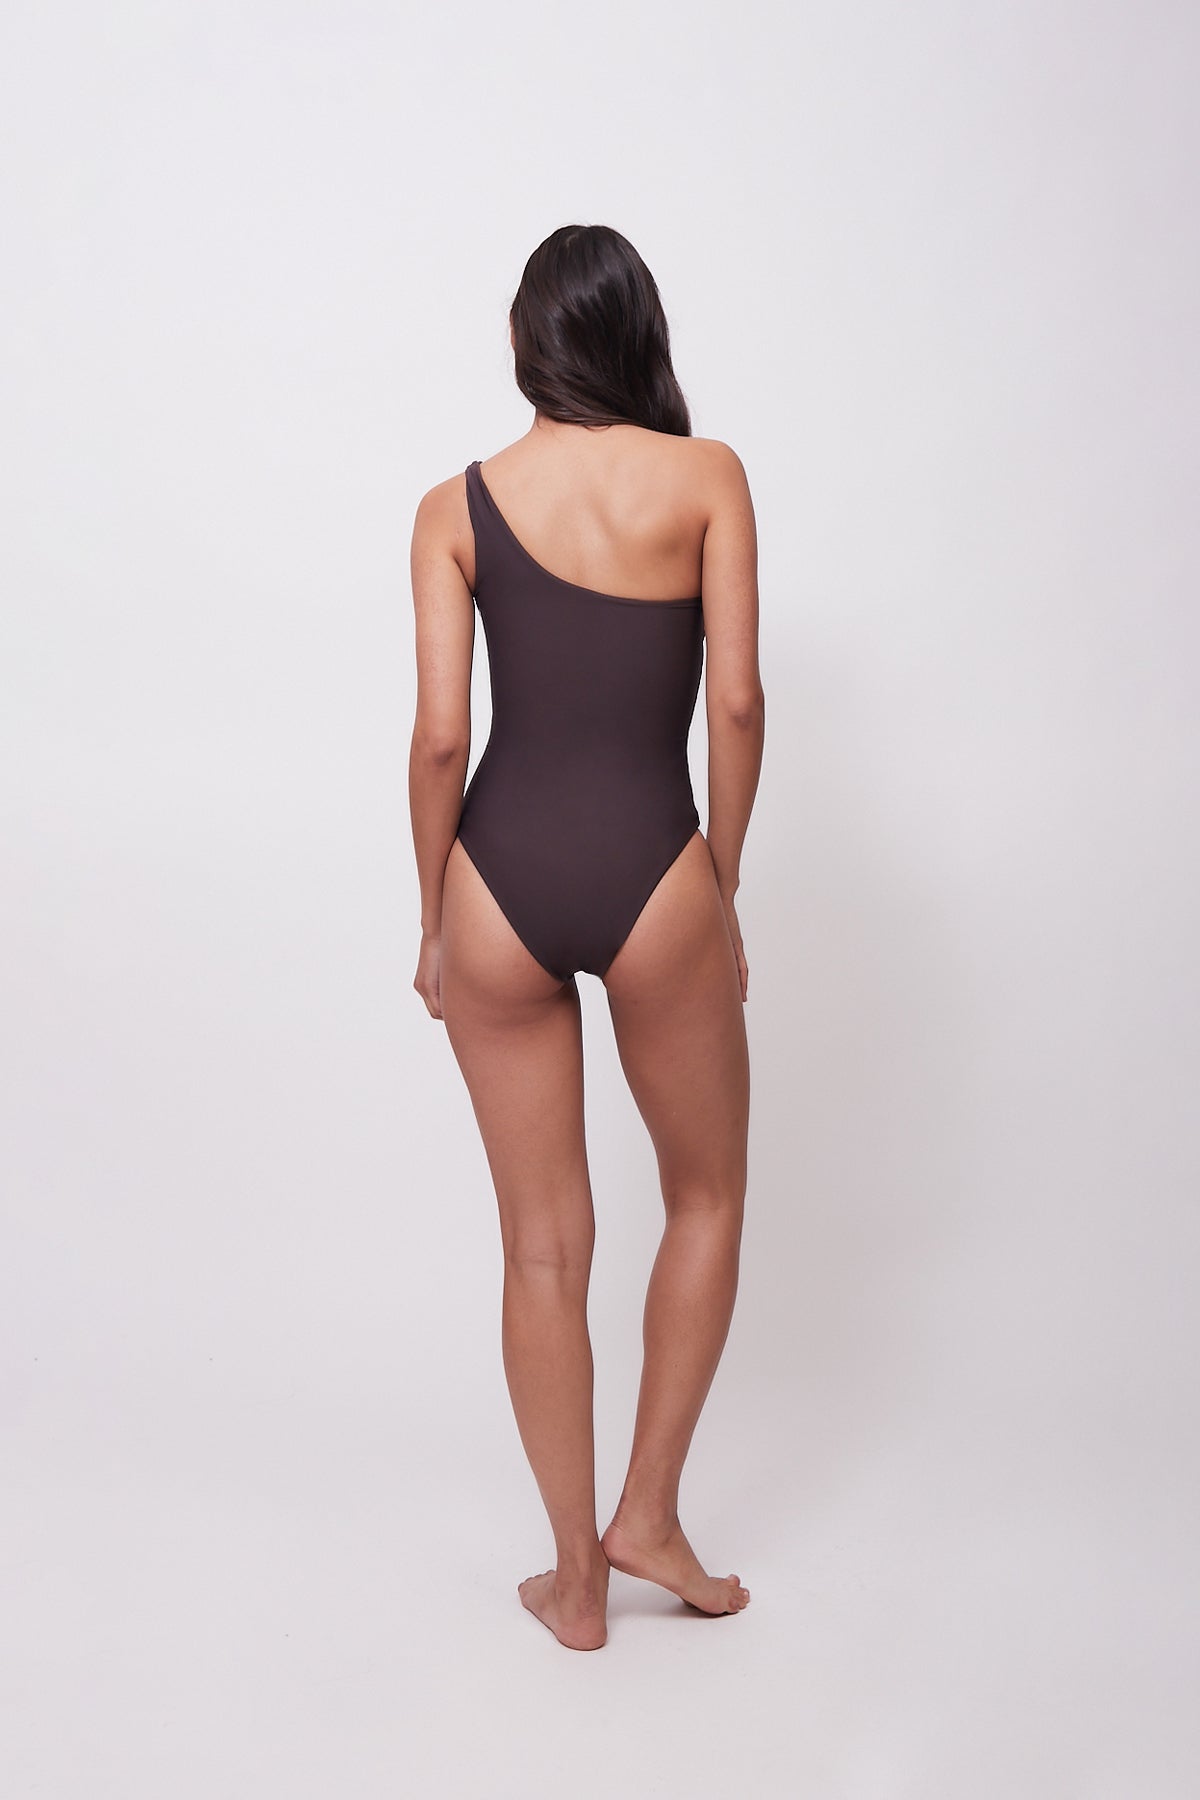 The Timeless One Piece Brown